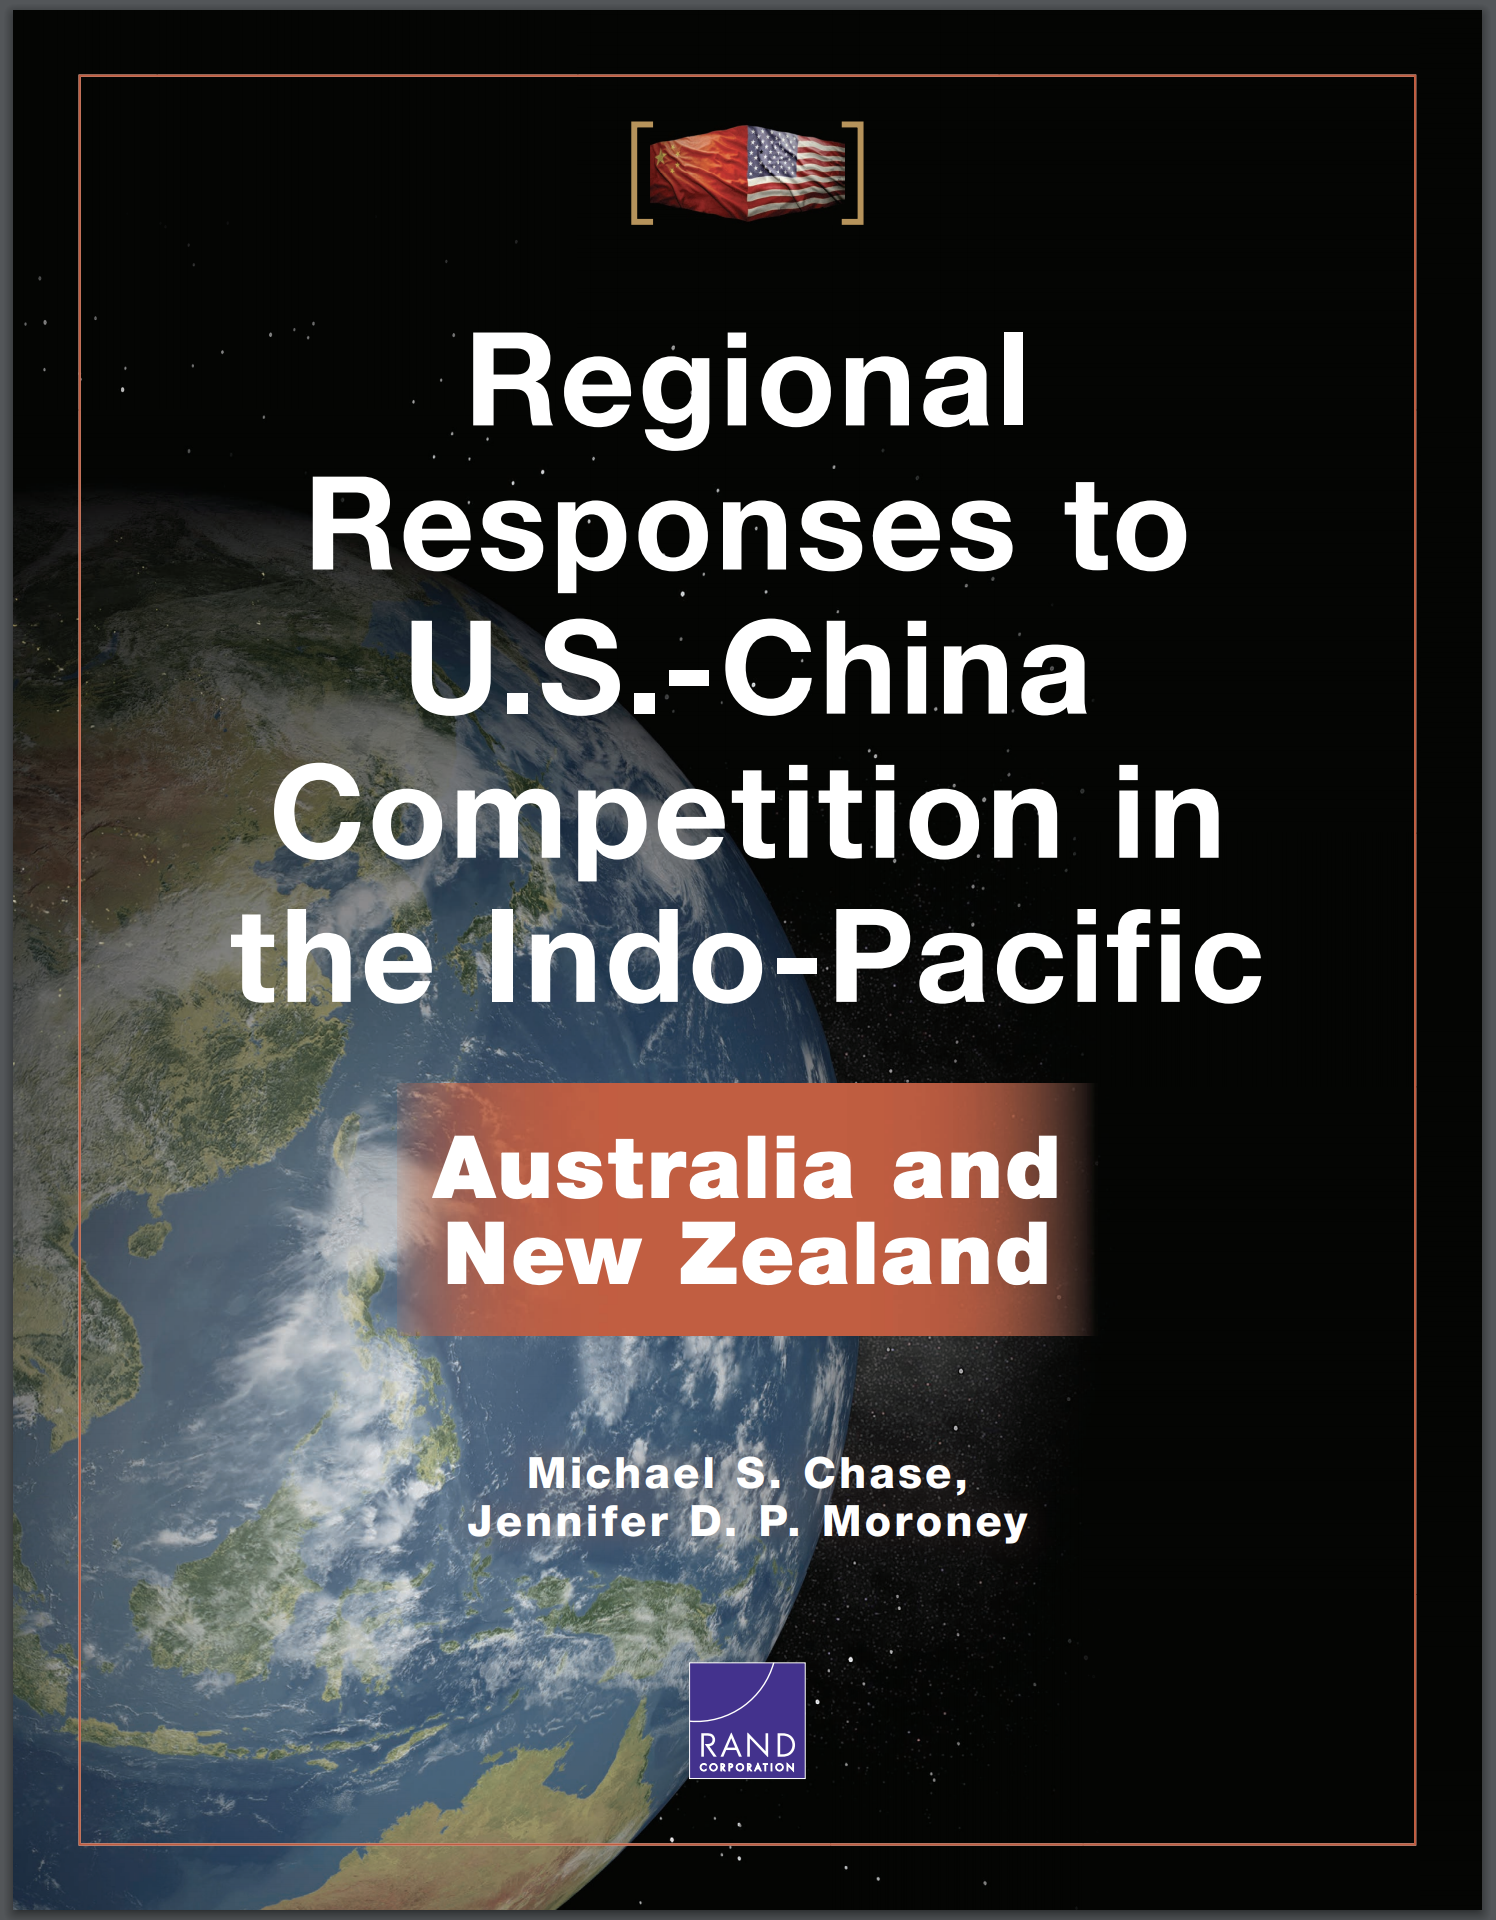 A New Cold War for the Developing World?: Understanding and Responding to  the Belt and Road Initiative > Air University (AU) > Journal of Indo-Pacific  Affairs Article Display